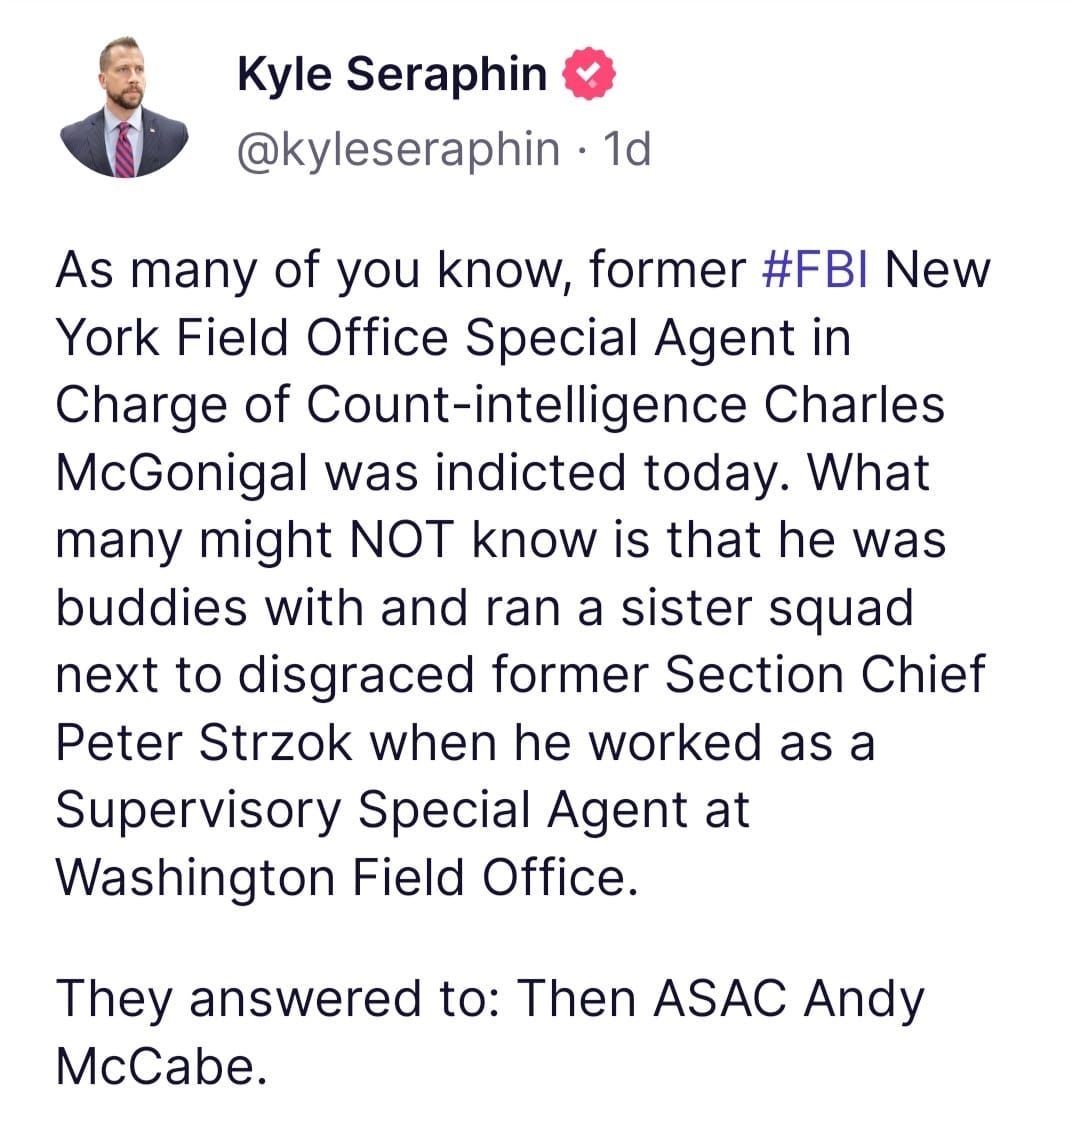 May be an image of 1 person and text that says 'Kyle Seraphin @kyleseraphin 1d former #FBI New in Chare As many of you know York Field Office Special Agen Charge of Count-intelligence McGonigal was indicted today. What many might NOT know is that he was buddies with and ran a sister squad next to disgraced former Section Chief Peter Strzok when he worked as a Supervisory Special Agent at Washington Field Office. They answered to: Then ASAC Andy McCabe.'